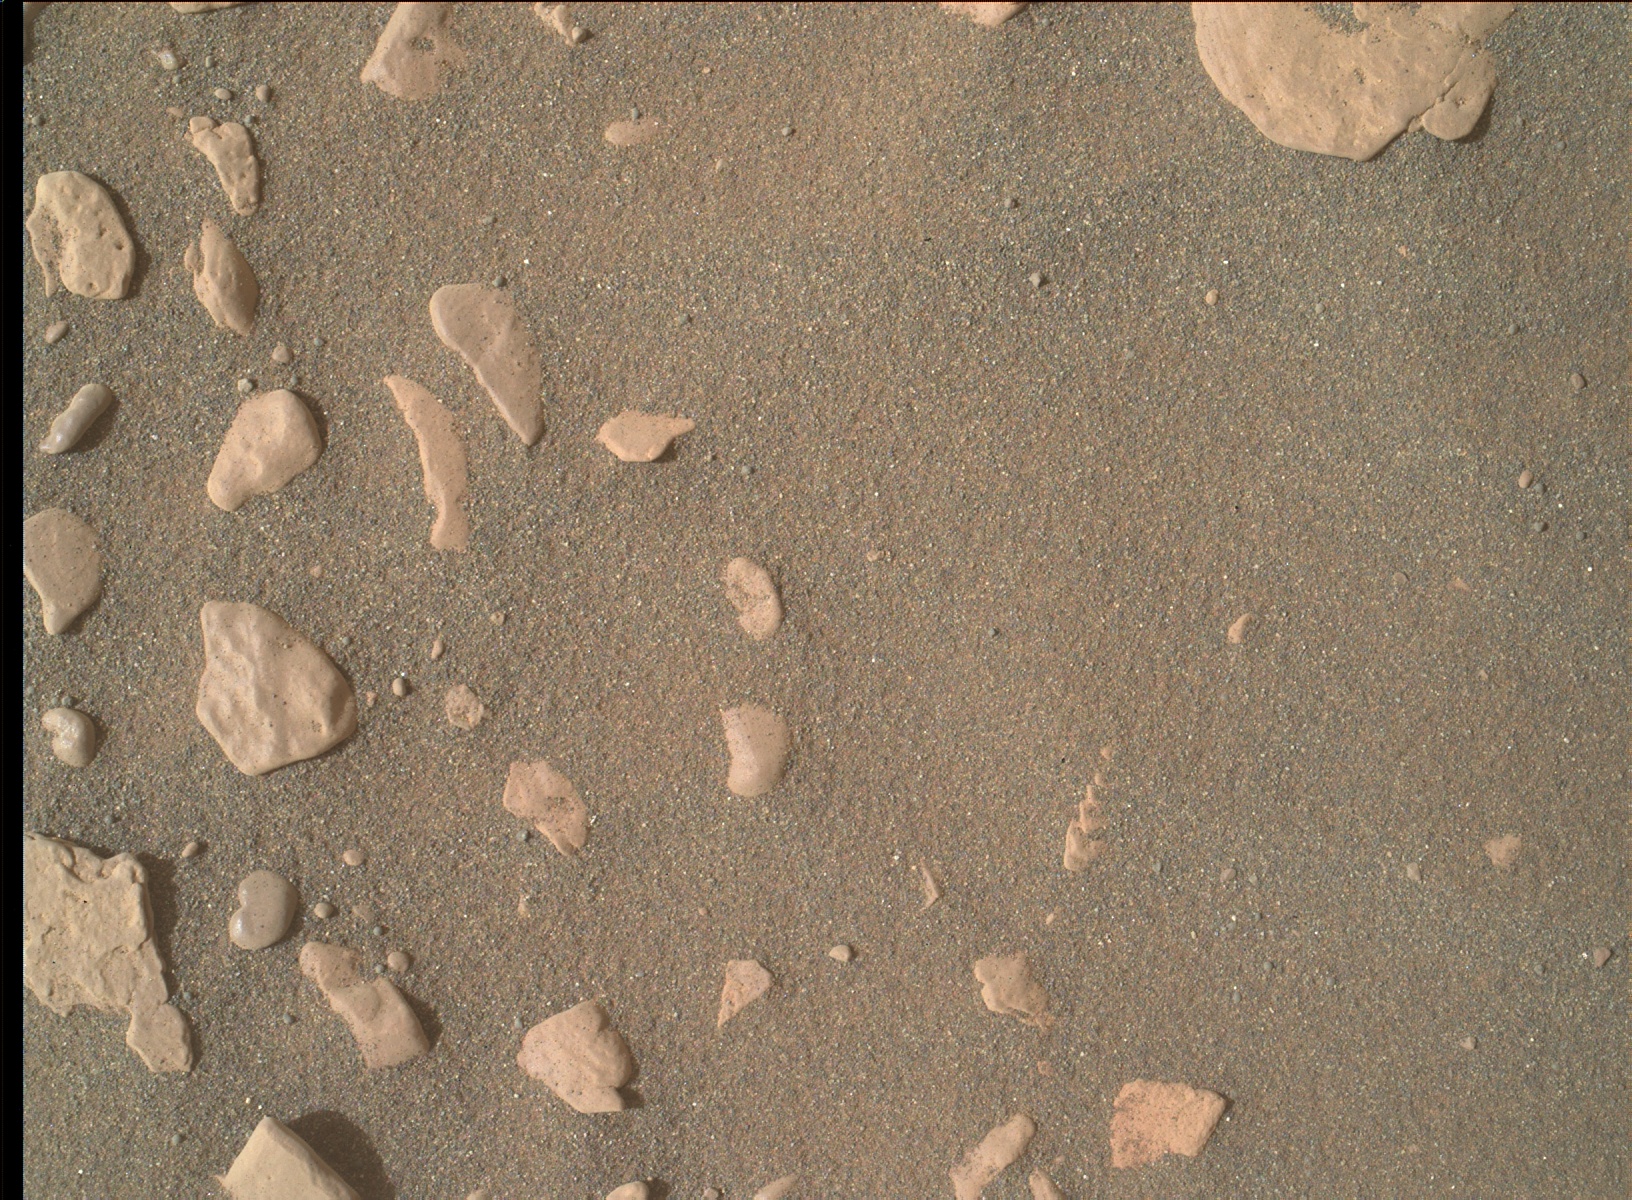 Nasa's Mars rover Curiosity acquired this image using its Mars Hand Lens Imager (MAHLI) on Sol 2369